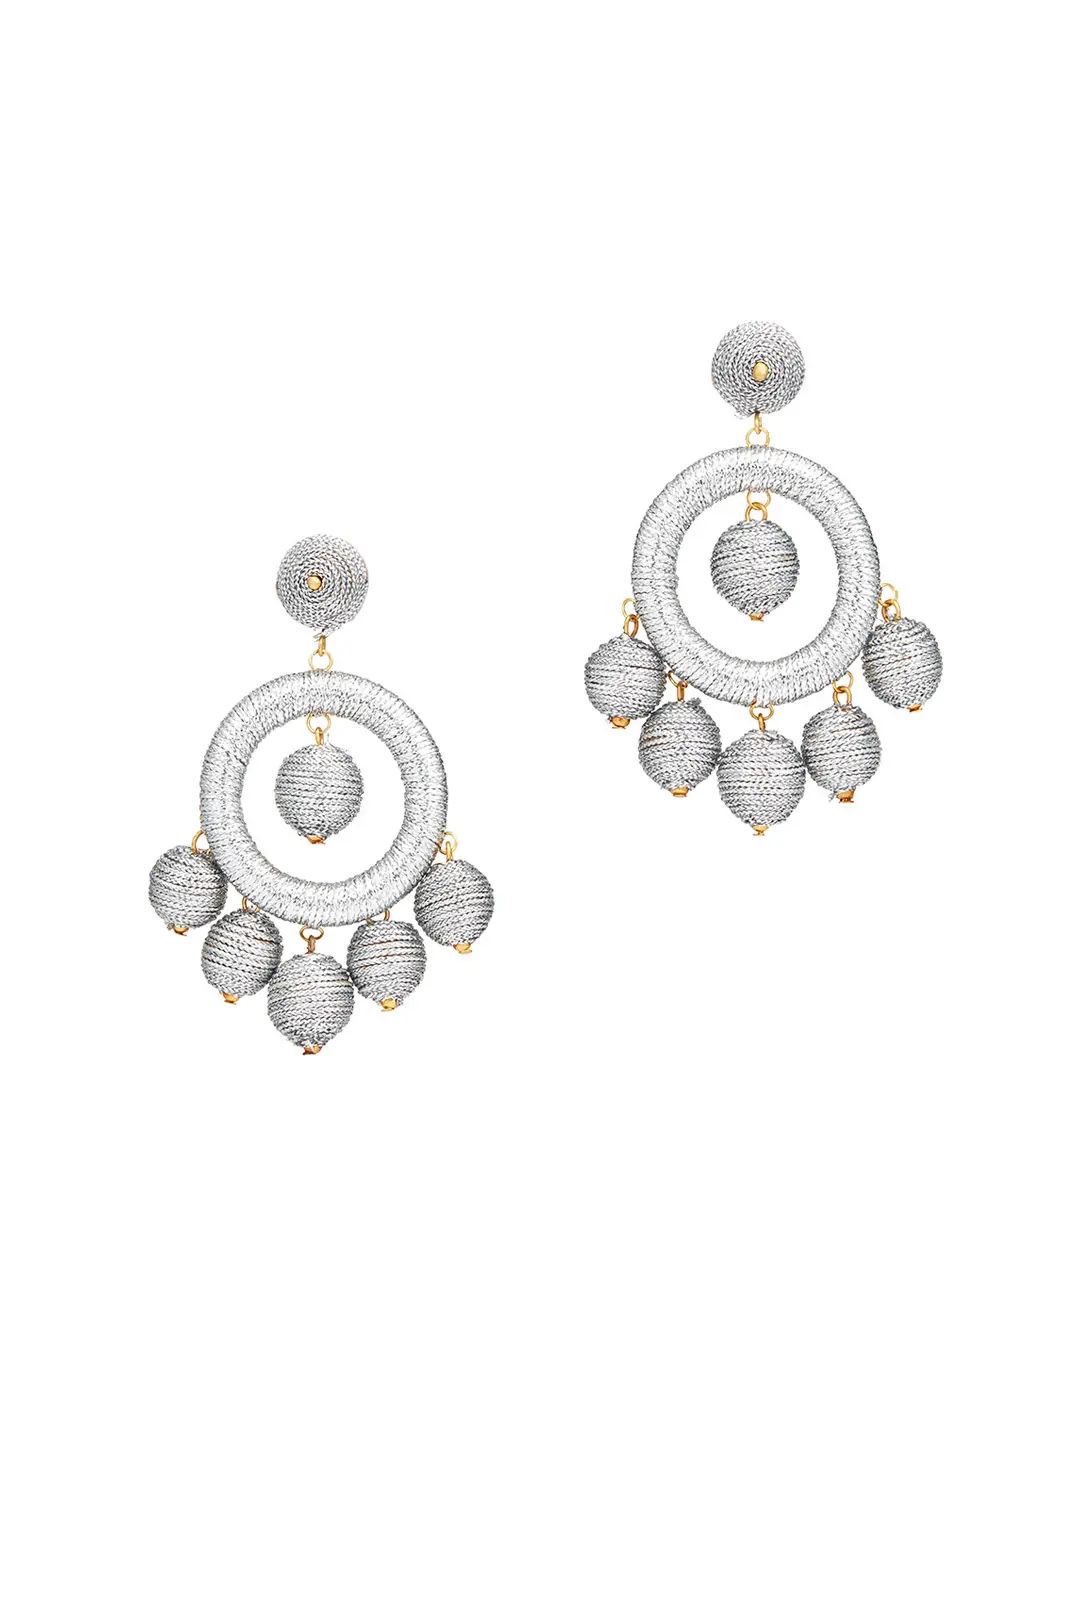 Kenneth Jay Lane Silver Wrap Circle Earrings | Rent The Runway